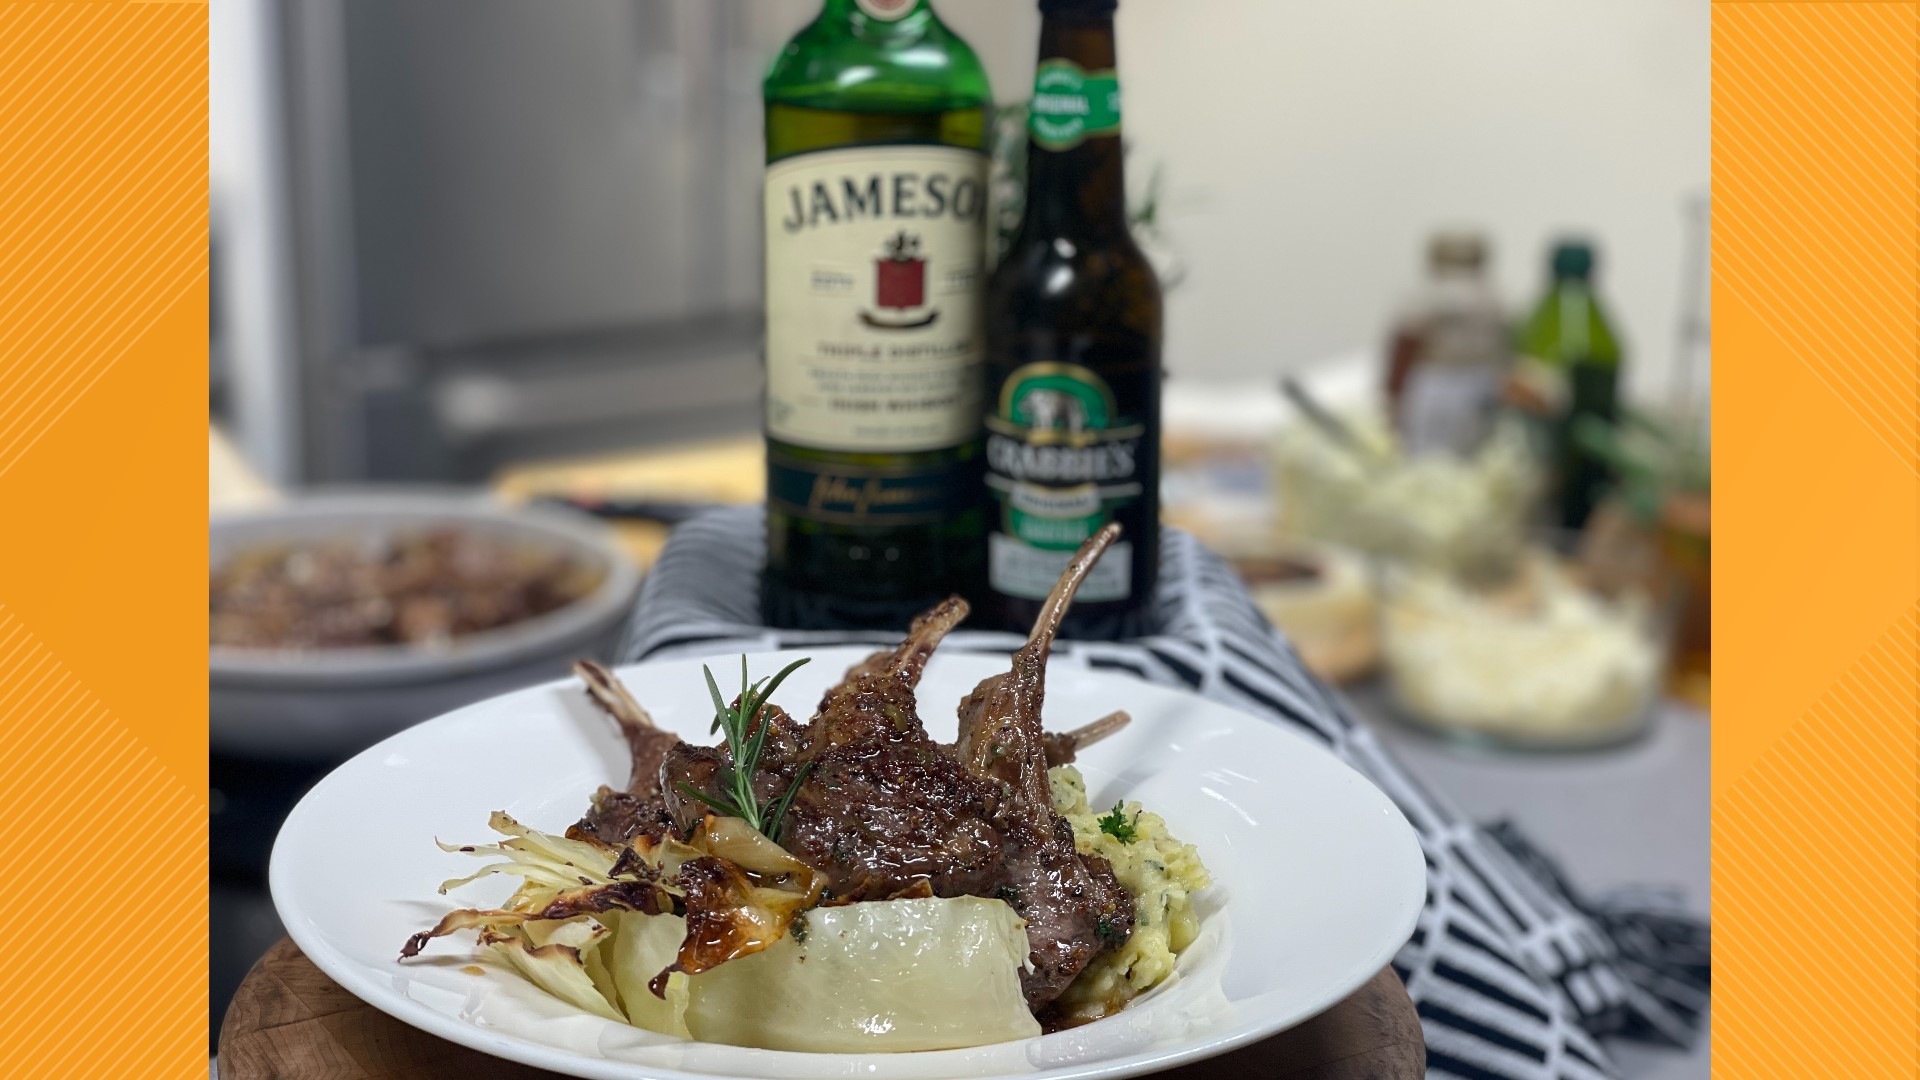 Jameson Glazed Lamb Chops served with Ireland-inspired Champ Mash and Buttery Roasted Cabbage Wedge will make diners feel as if they are visiting The Emerald Isle.